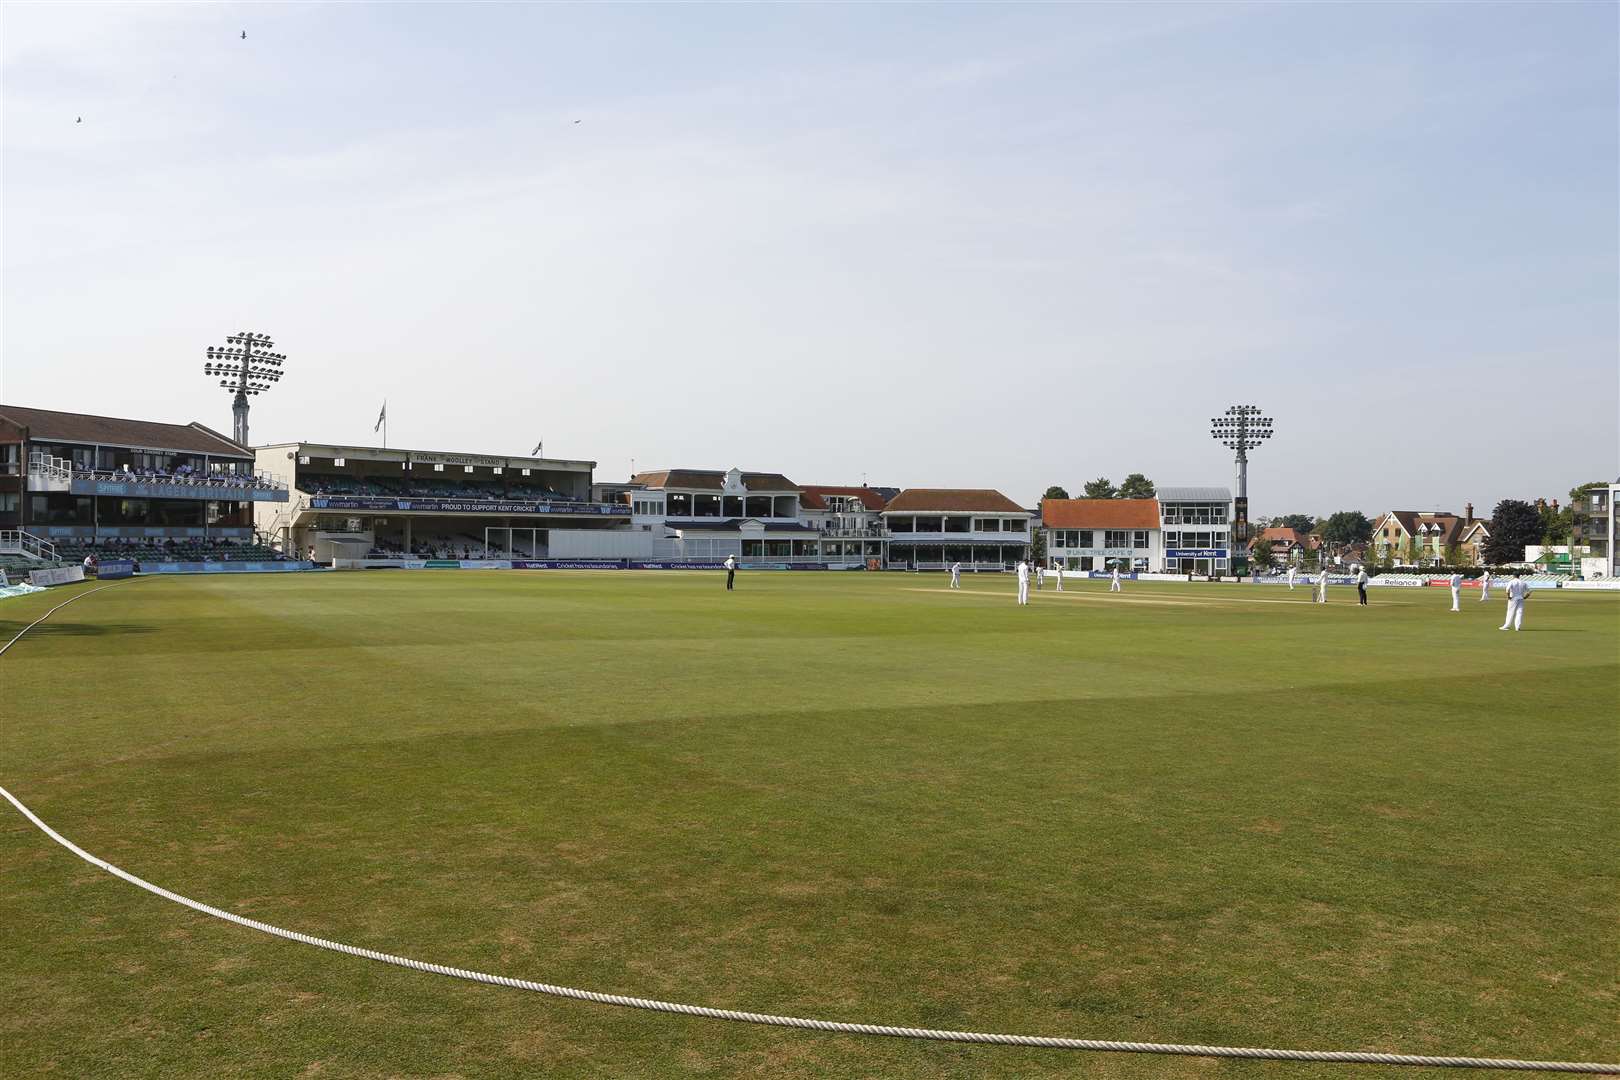 England Lions against South Africa A at the St Lawrence Ground in 2017 – this view of the ground has not changed in the last three years